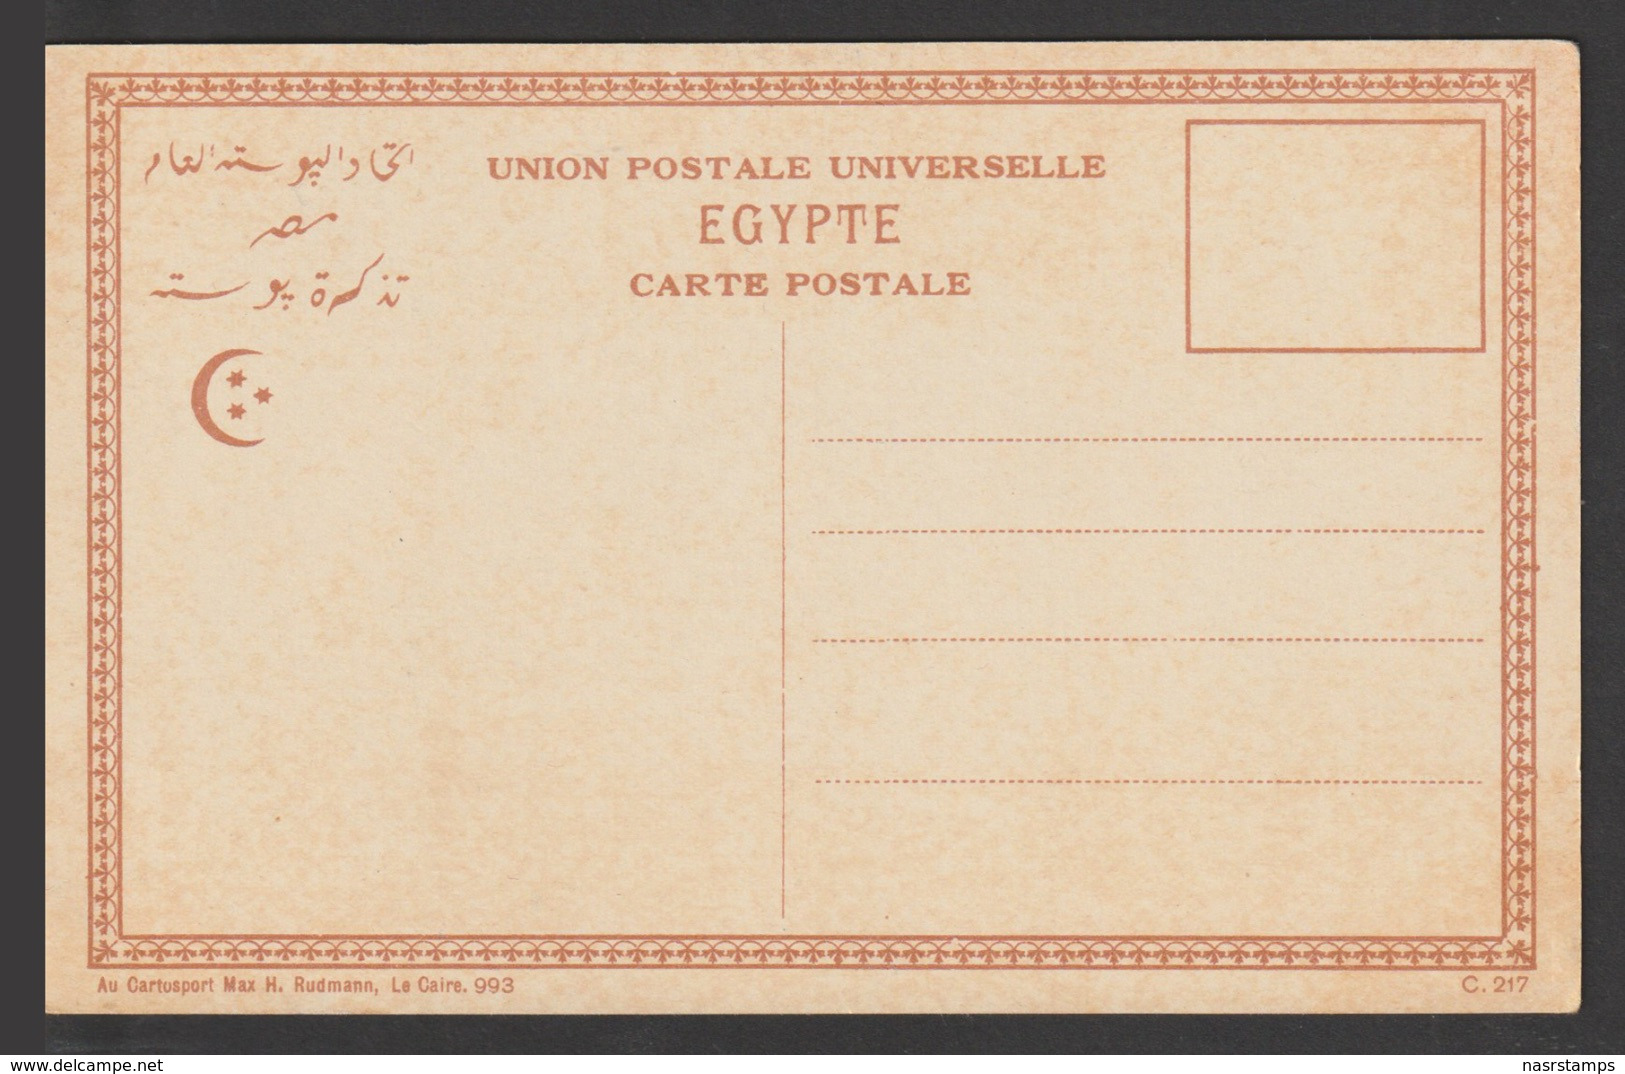 Egypt - Very Rare - Vintage Post Card - View Of The Jardin D'embassy Of France - 1866-1914 Ägypten Khediva